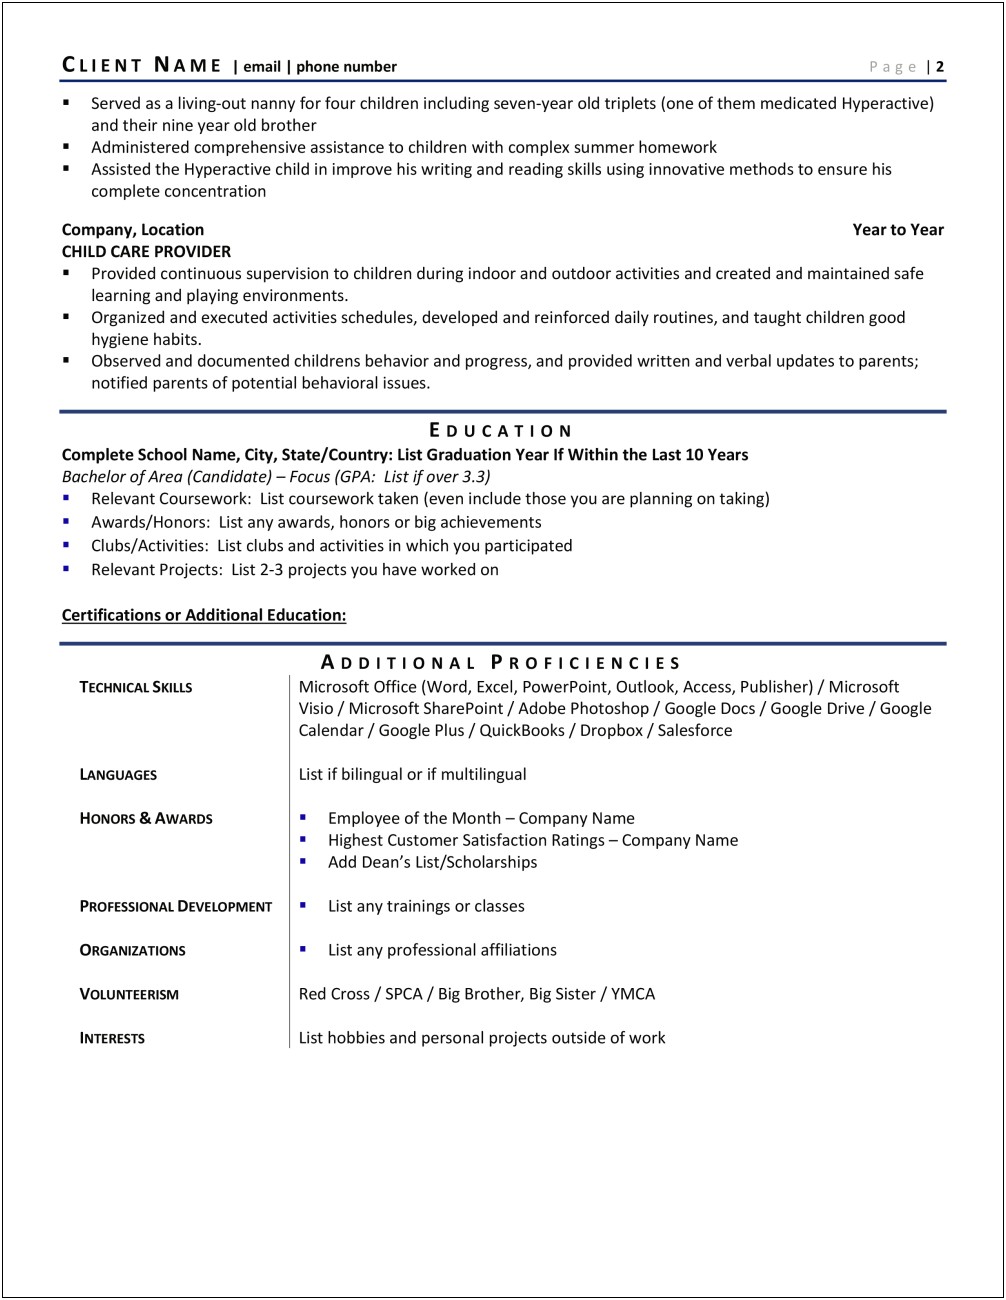 Resume For A Worker At Daycare Center